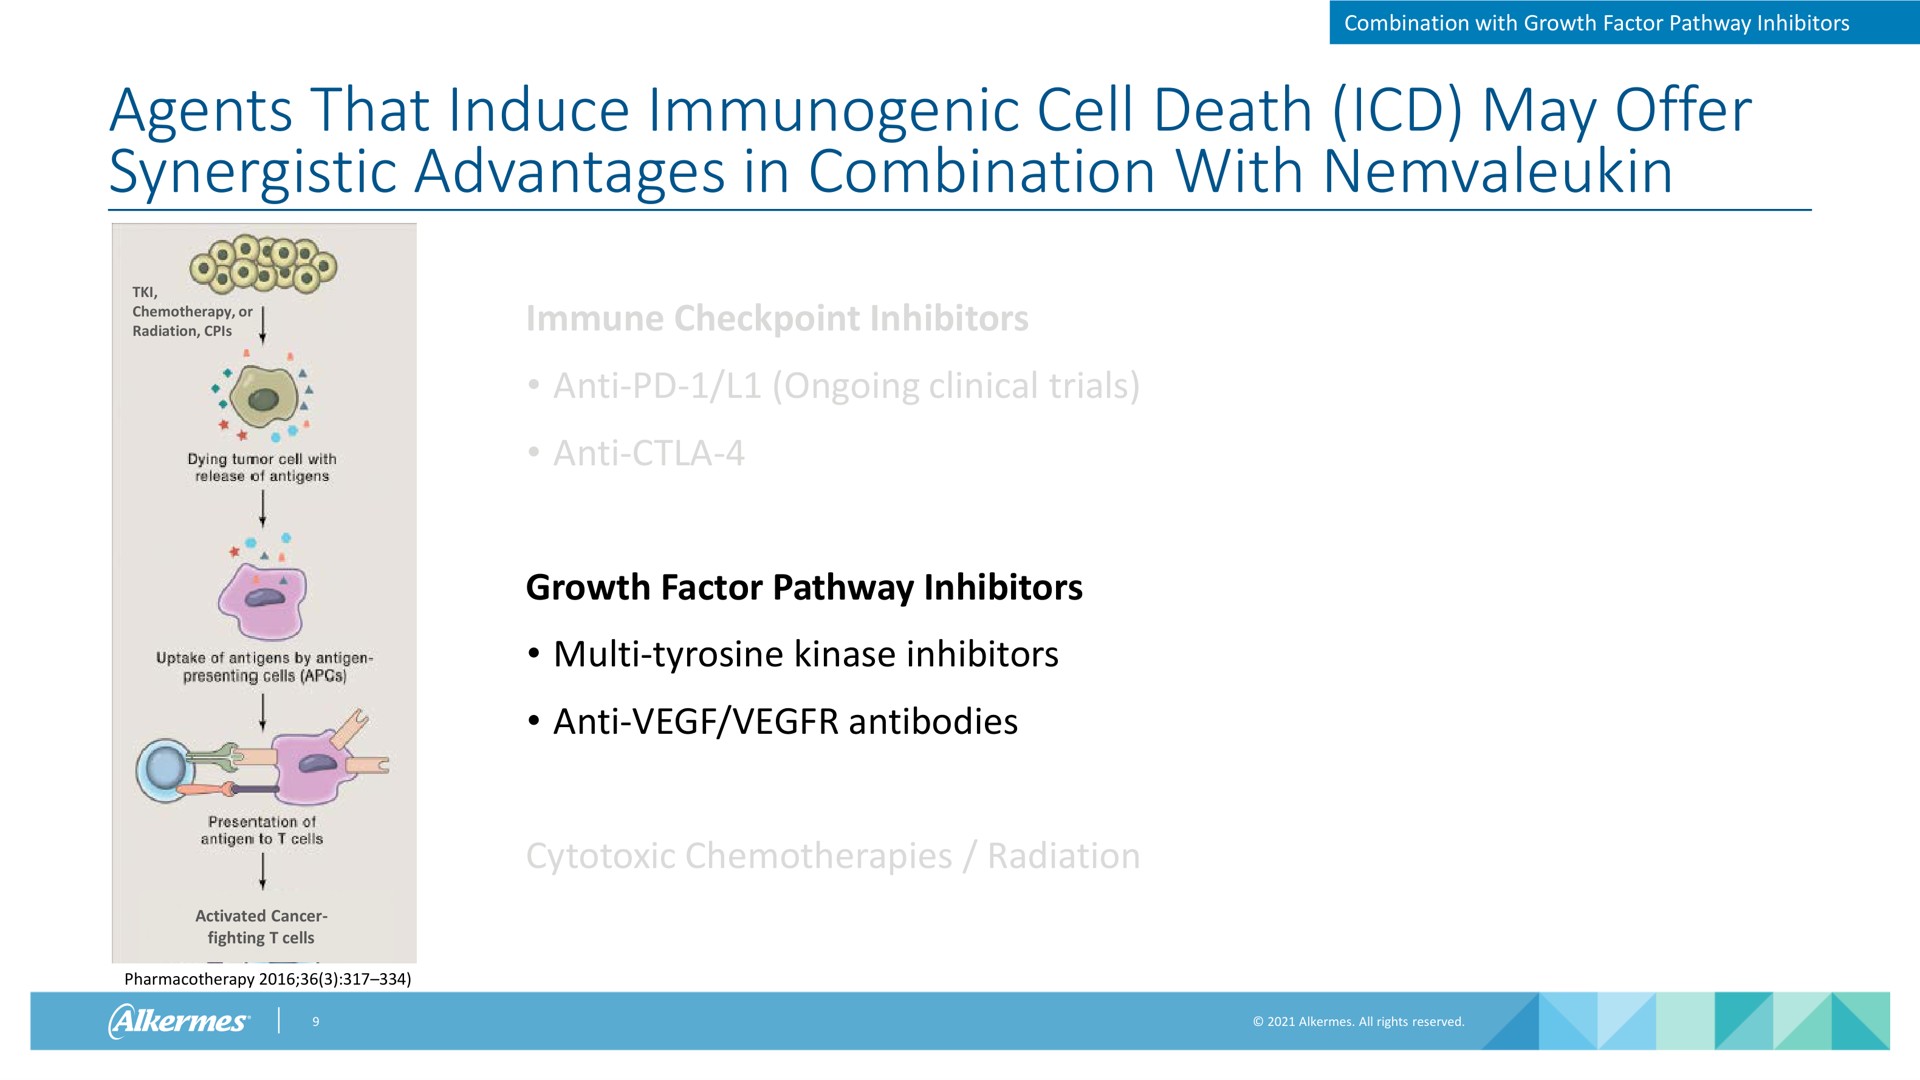 agents that induce immunogenic cell death may offer synergistic advantages in combination with combination with growth factor pathway inhibitors chemotherapy or radiation immune inhibitors anti ongoing clinical trials anti growth factor pathway inhibitors tyrosine kinase inhibitors anti antibodies cytotoxic chemotherapies radiation activated cancer fighting cells pharmacotherapy alkermes | Alkermes